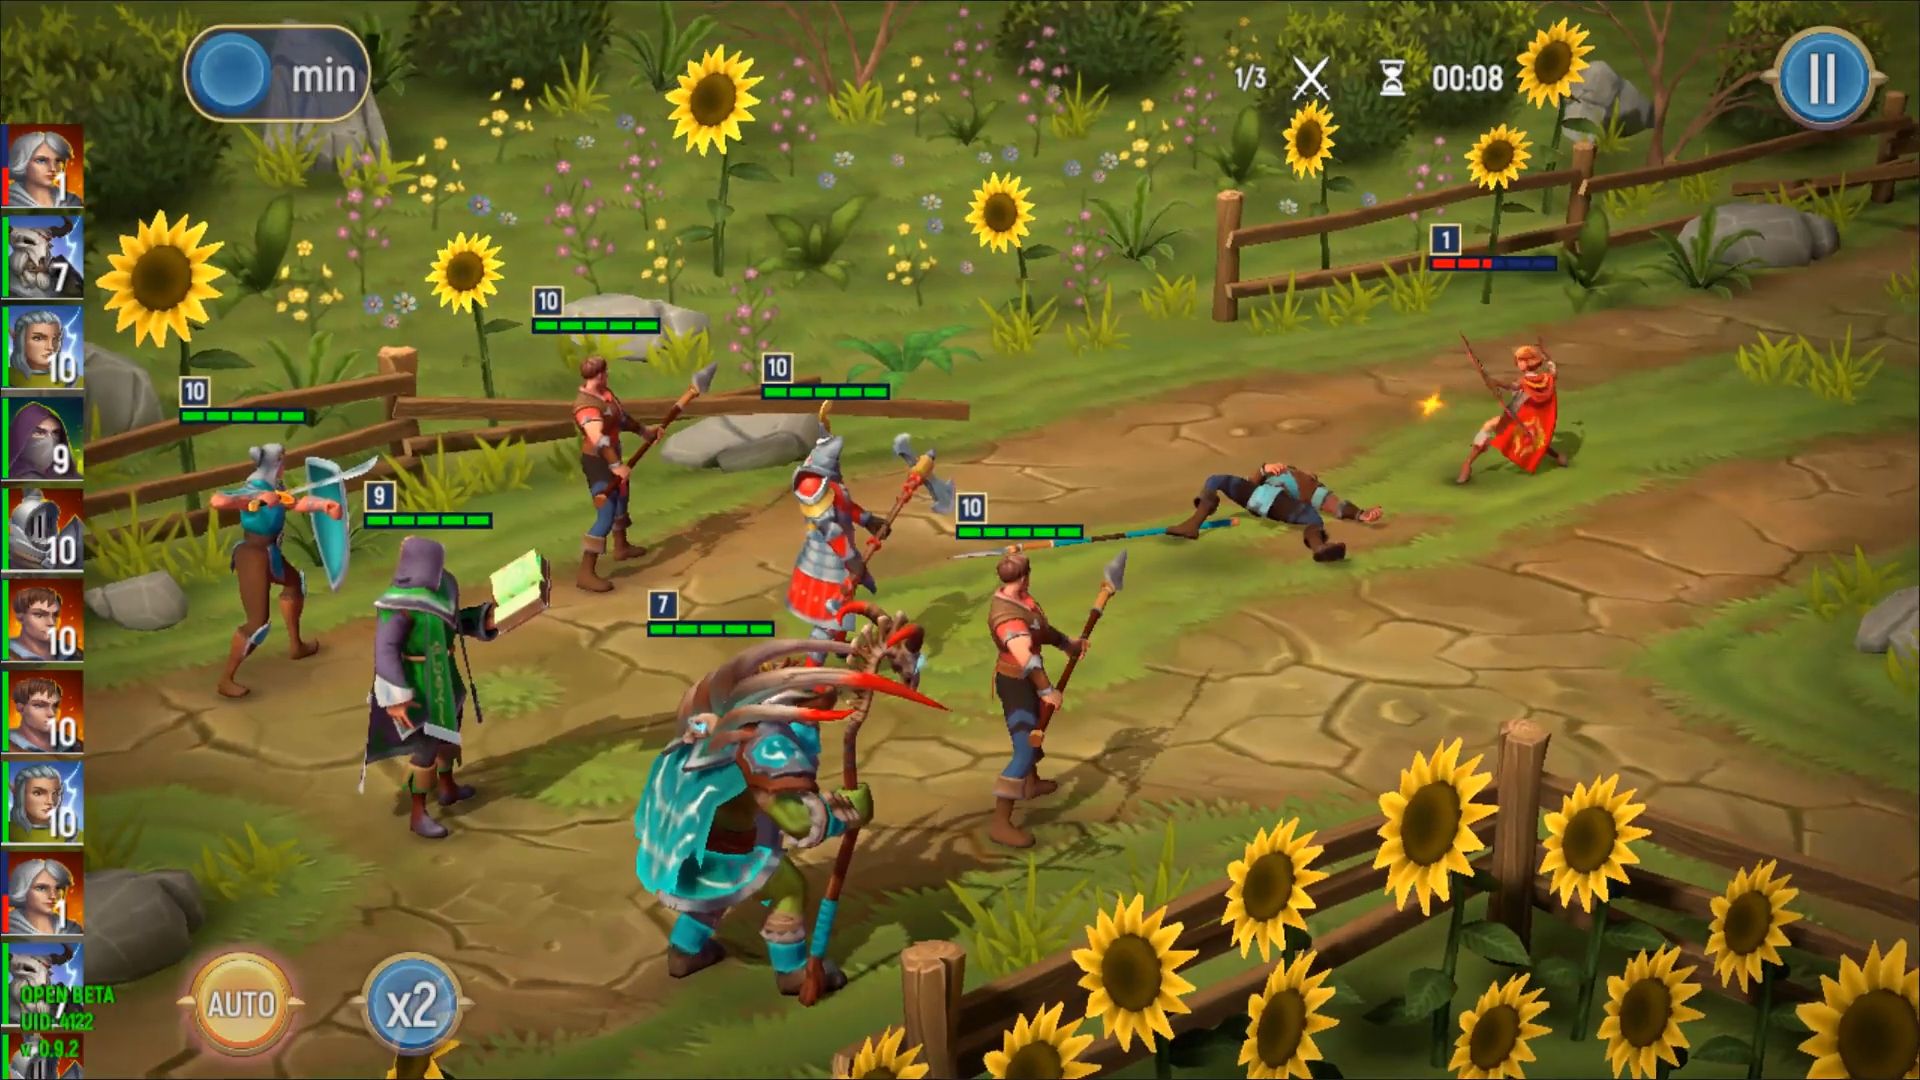 Warlords: Turn Based RPG Games PVP & Role Playing for Android